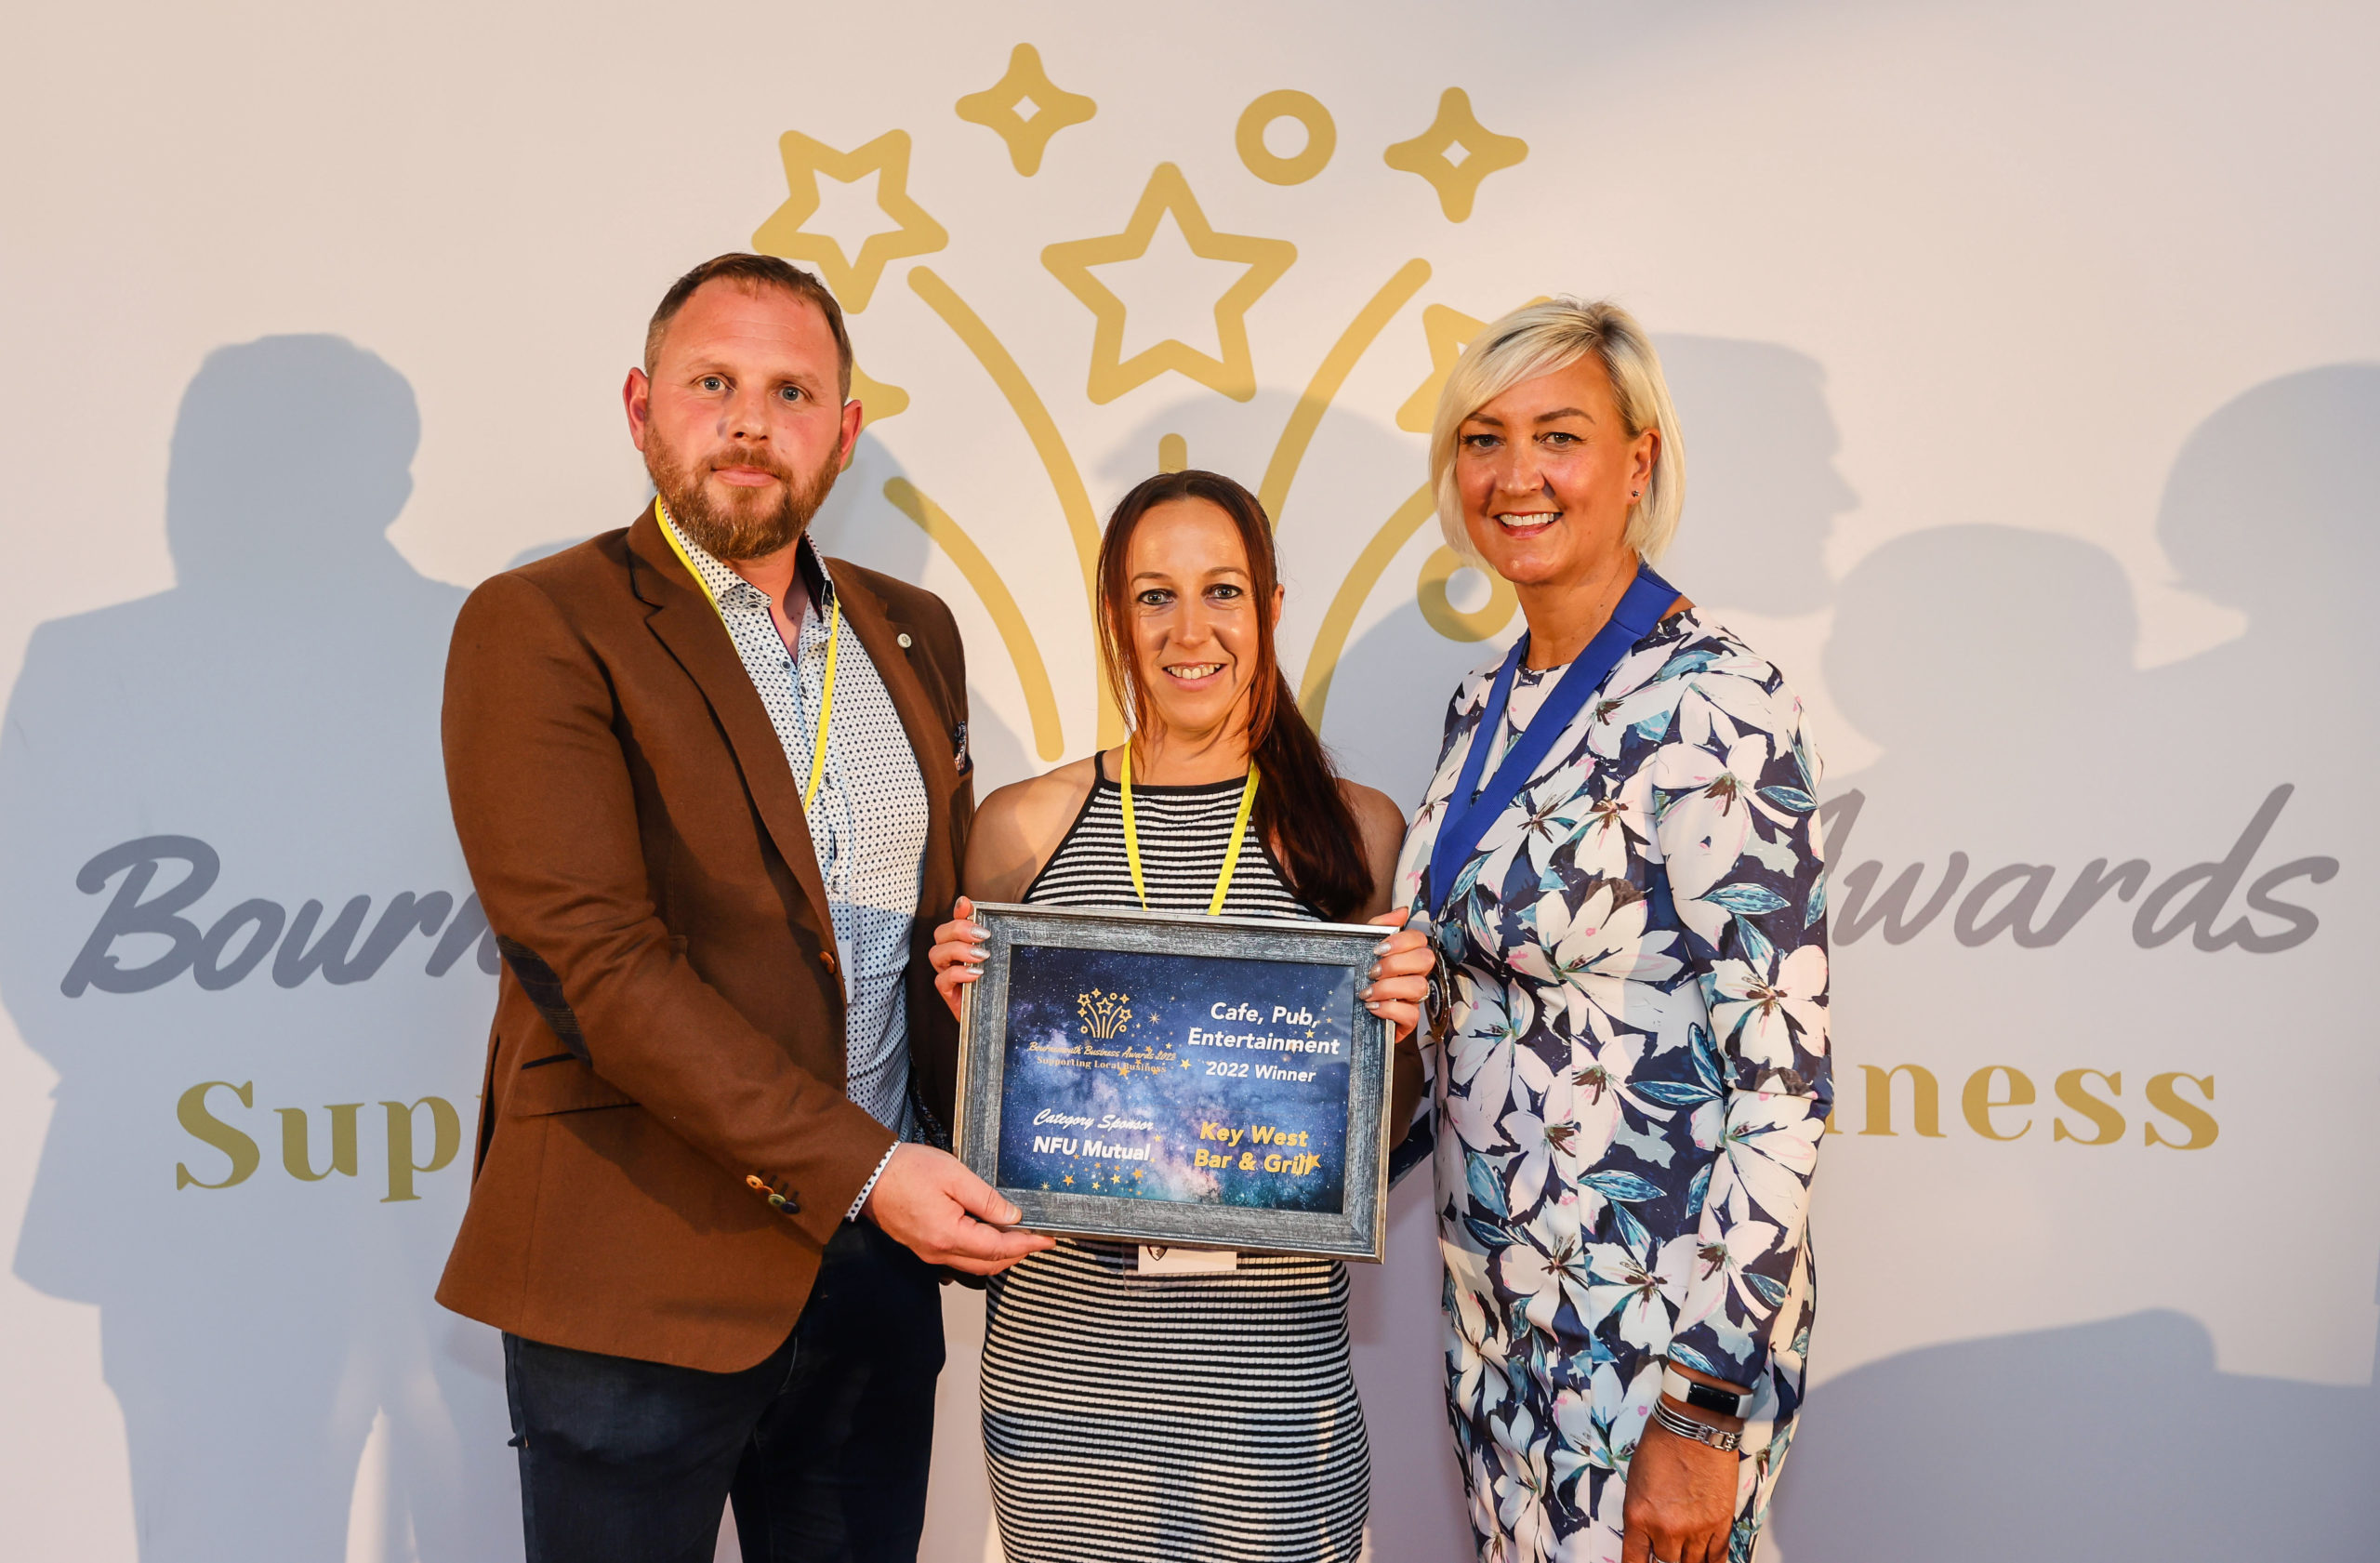 Key West Bar & Grill on Bournemouth Pier wins Café, Pub and Entertainment Business of the year at the Bournemouth Business Awards